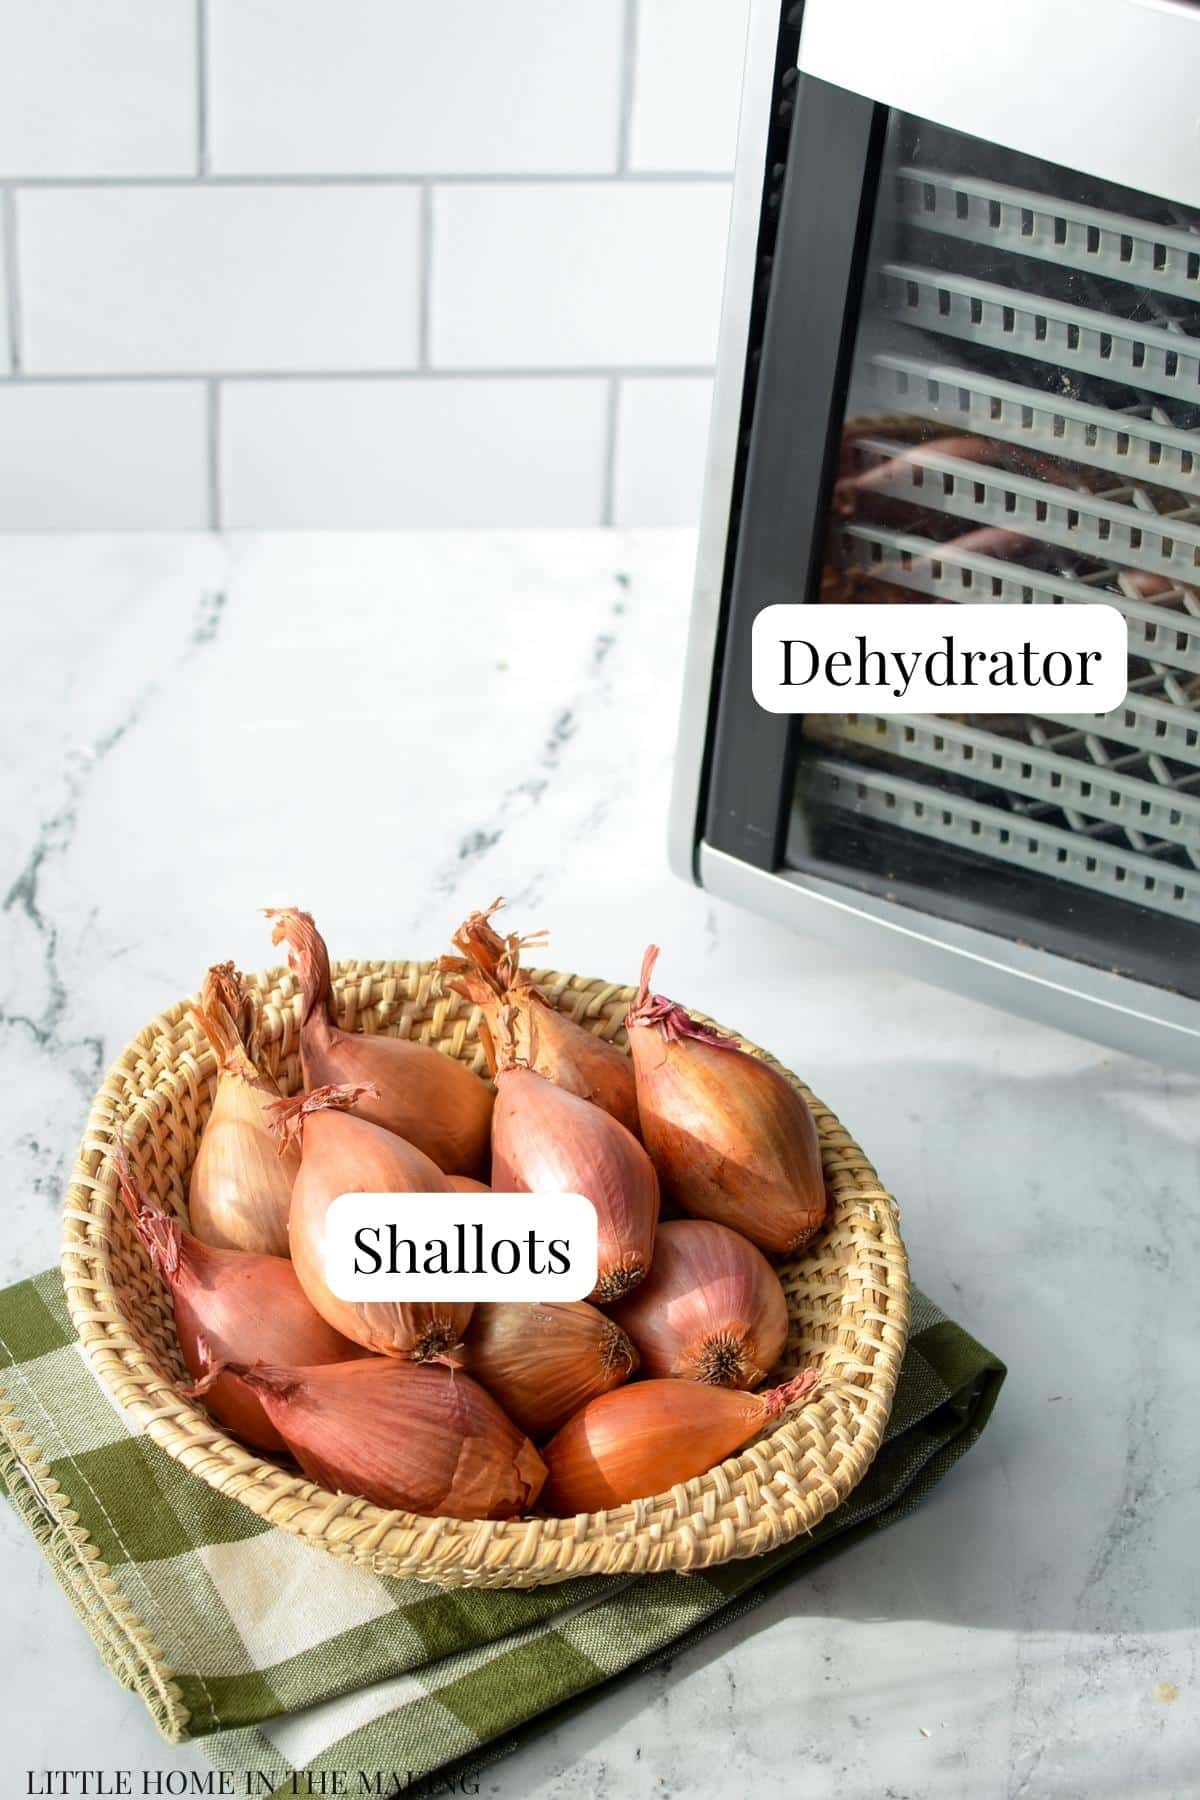 A dehydrator with a basket of shallots in front.